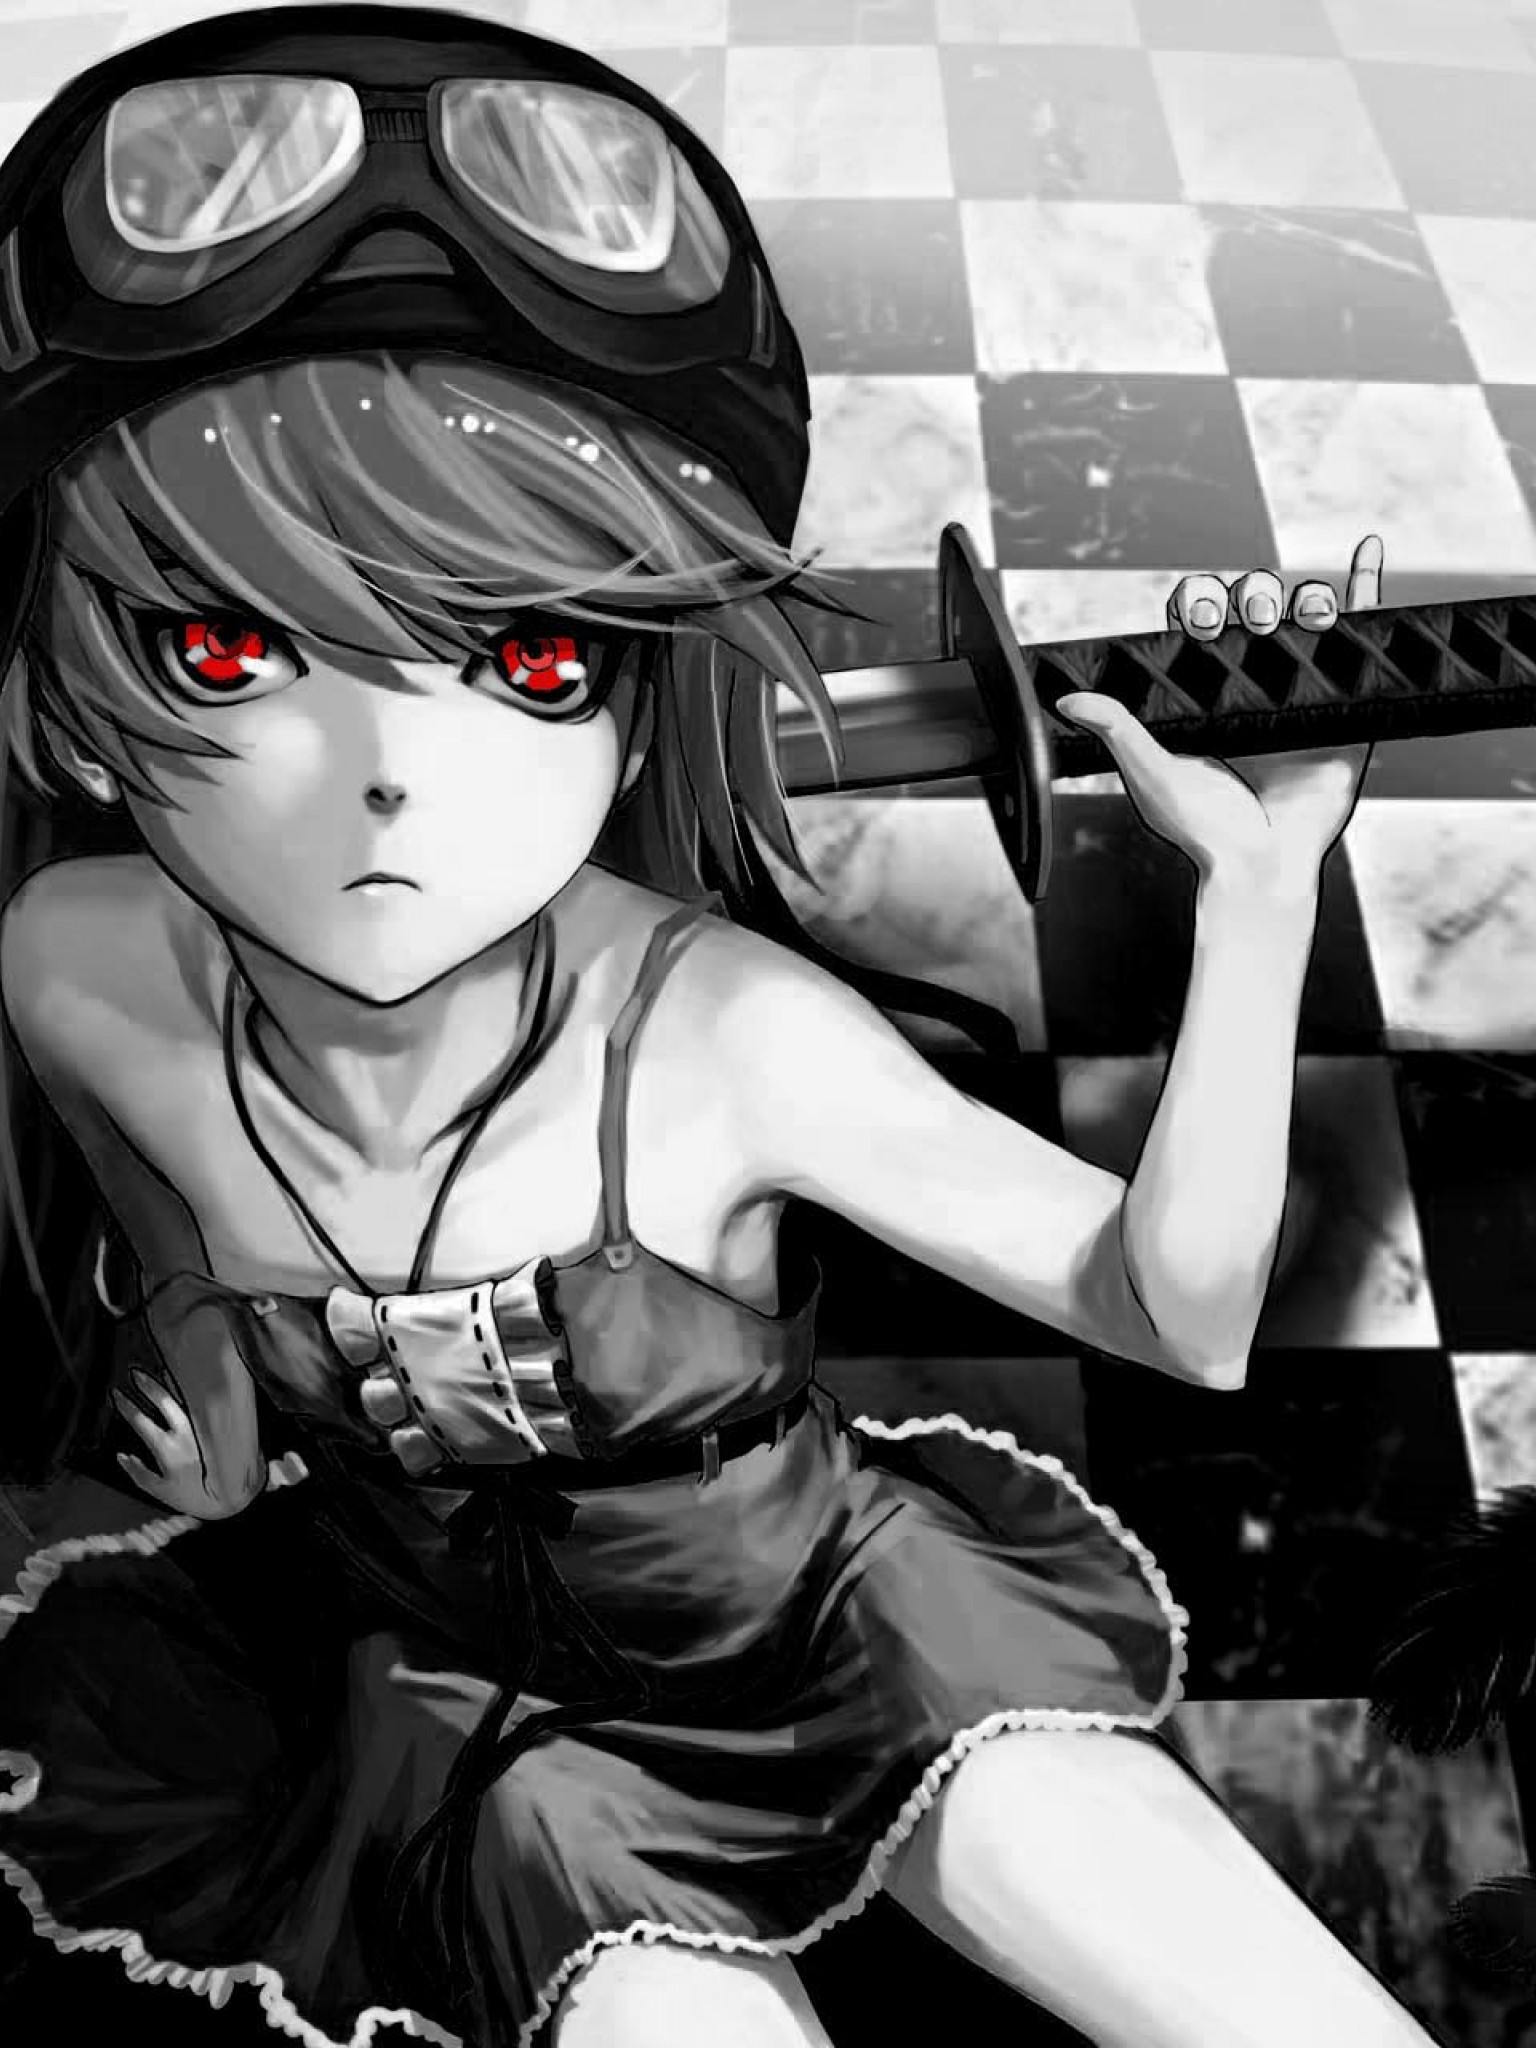 Black And White Anime Girl With Sword Wallpaper For Desktop And